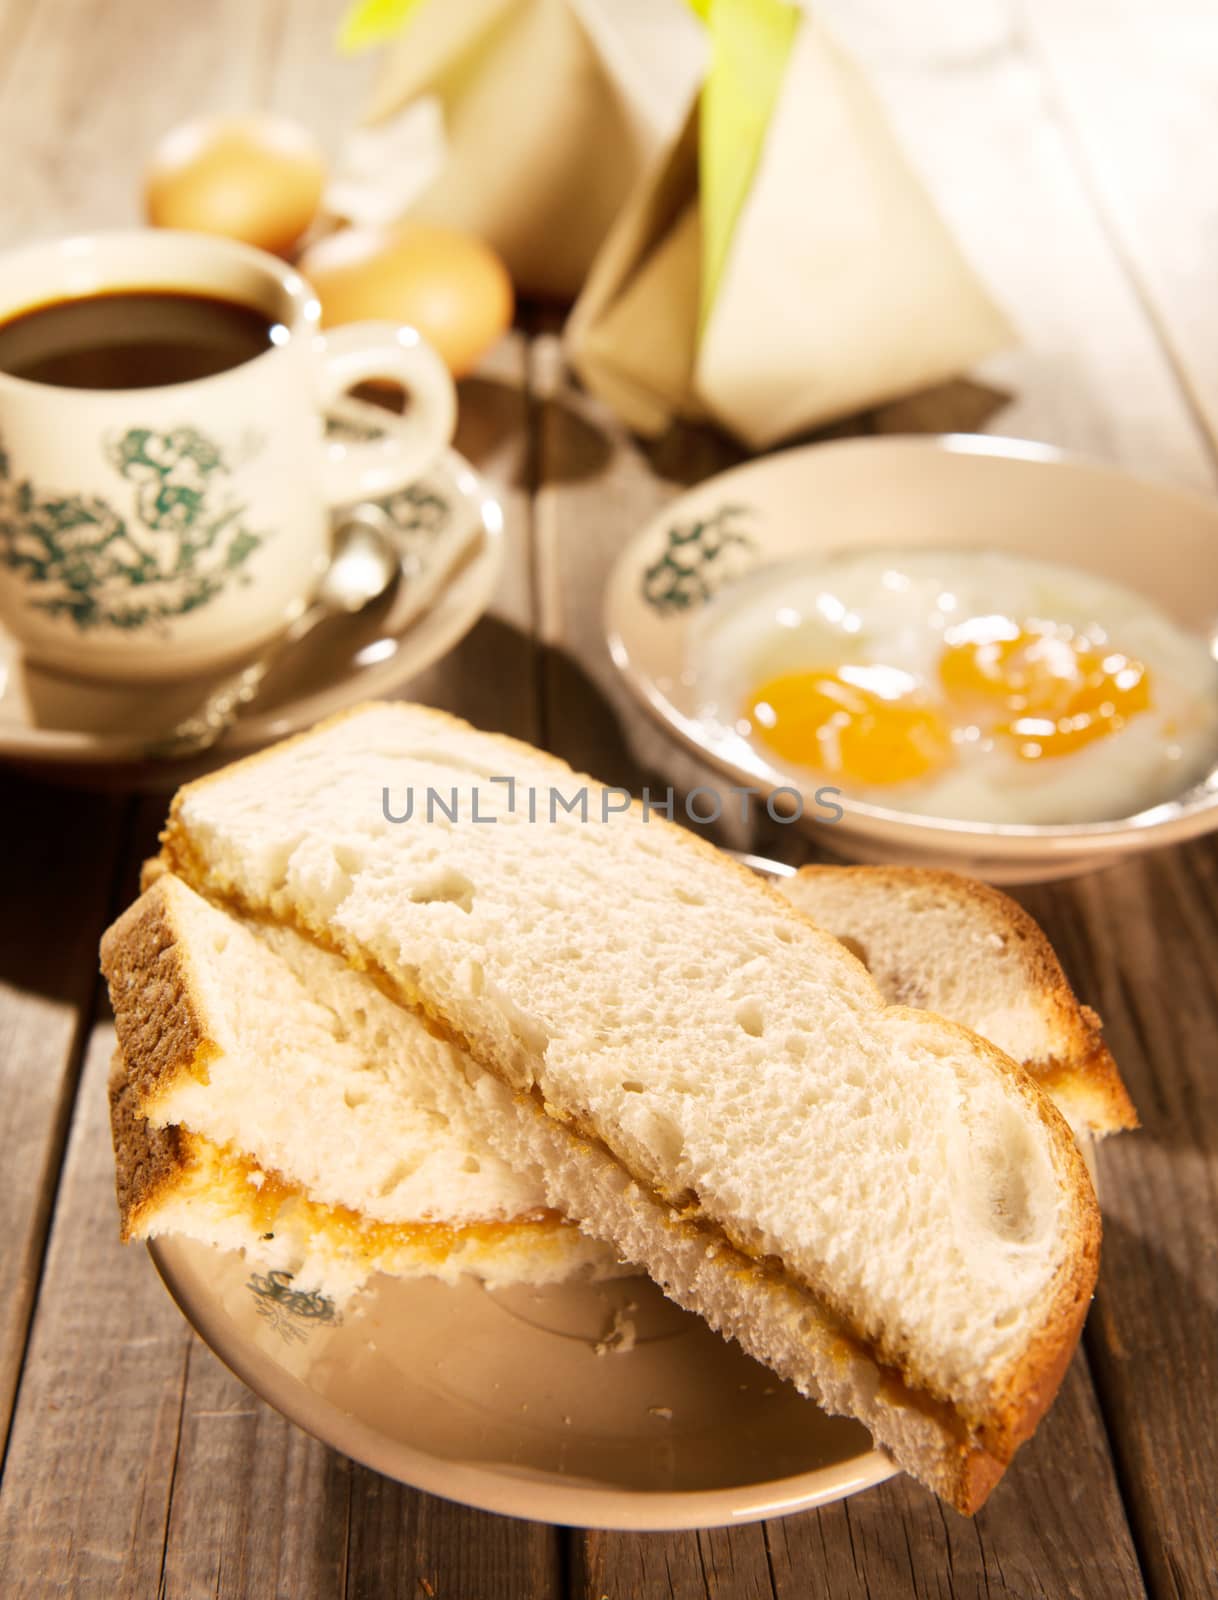 Traditional Chinese Malaysian style breakfast, kaya butter toast, nasi lemak and boiled eggs with coffee. Fractal on the cup is generic print. Soft focus setting with dramatic ambient light on dark wooden background.